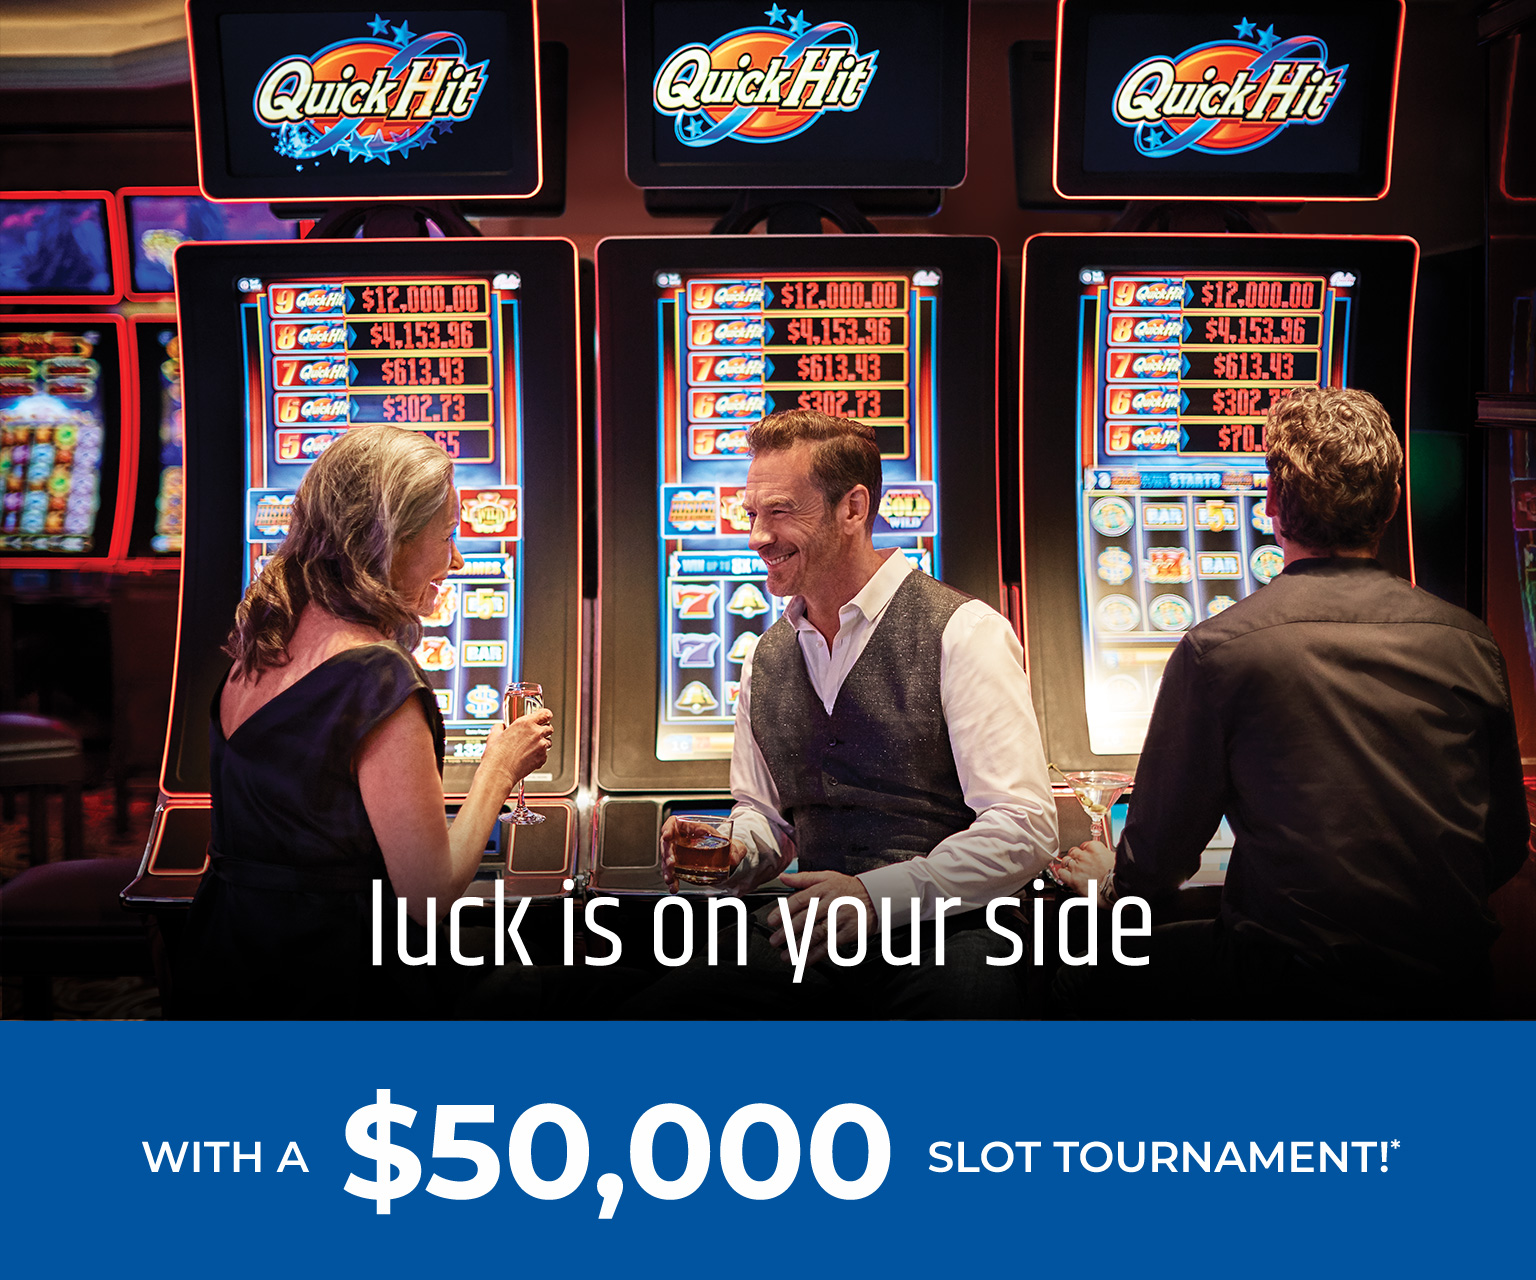 Luck is on your side with a $50,000 slot tournament!*